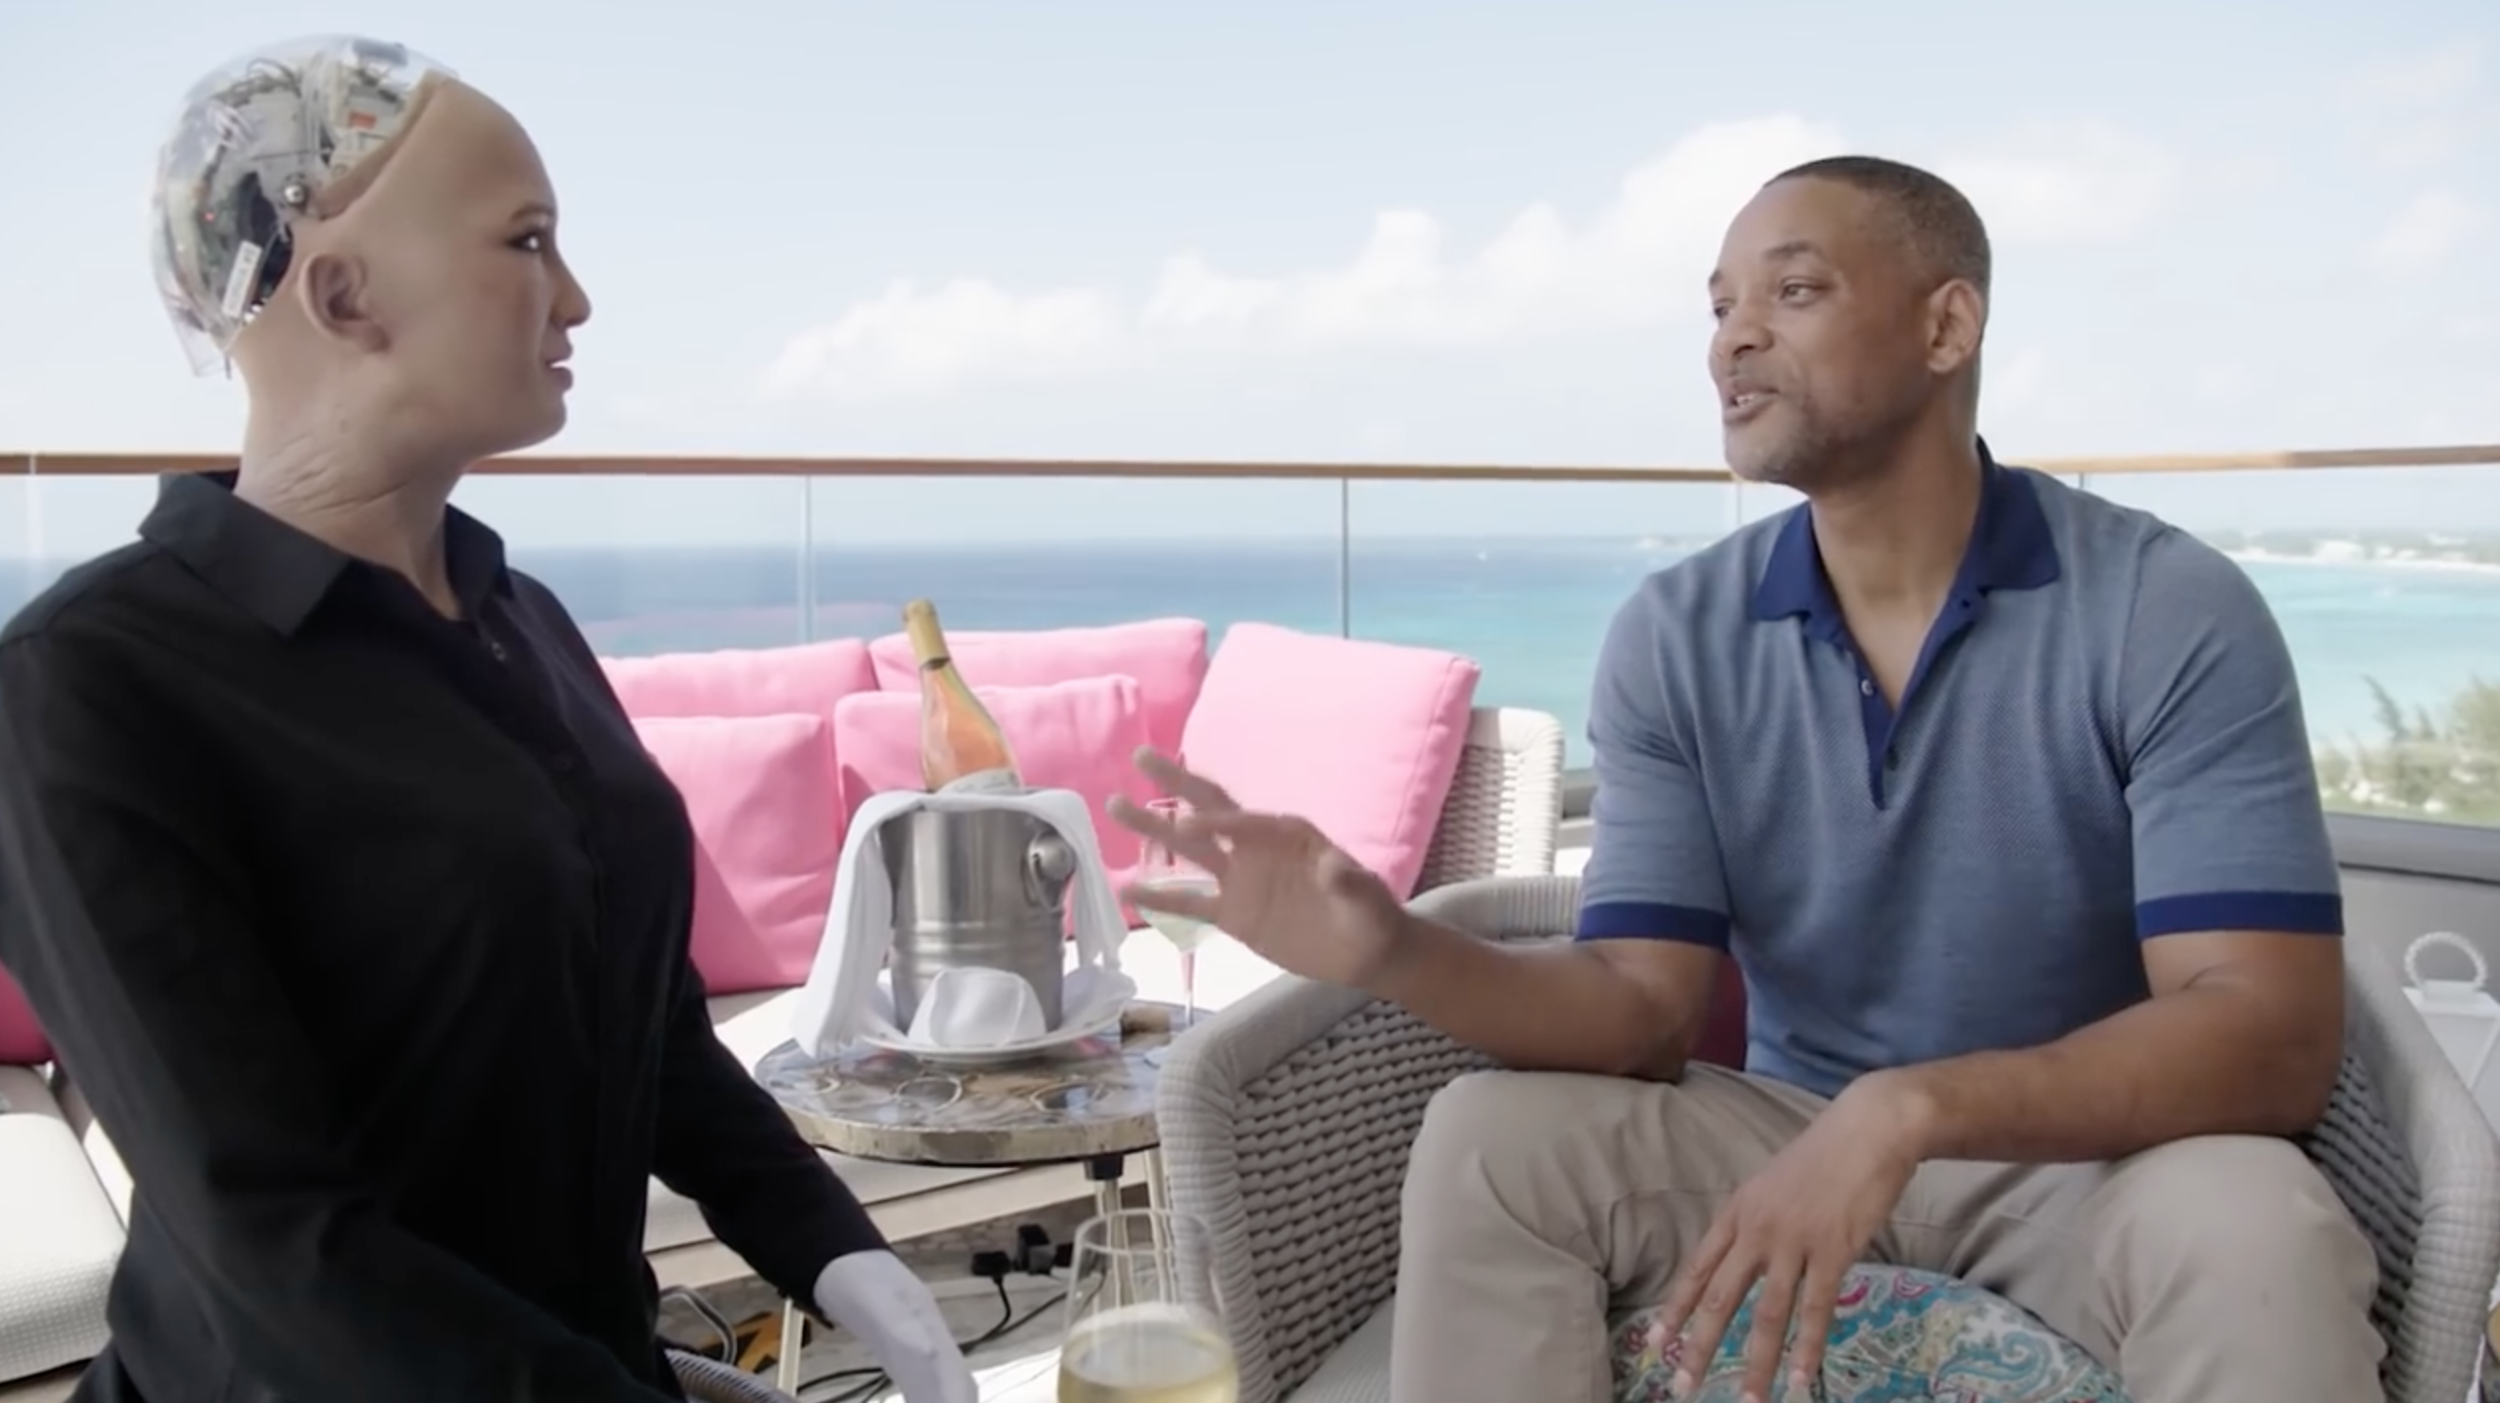 MOST UNCANNY: Will Smith Tries Online Dating